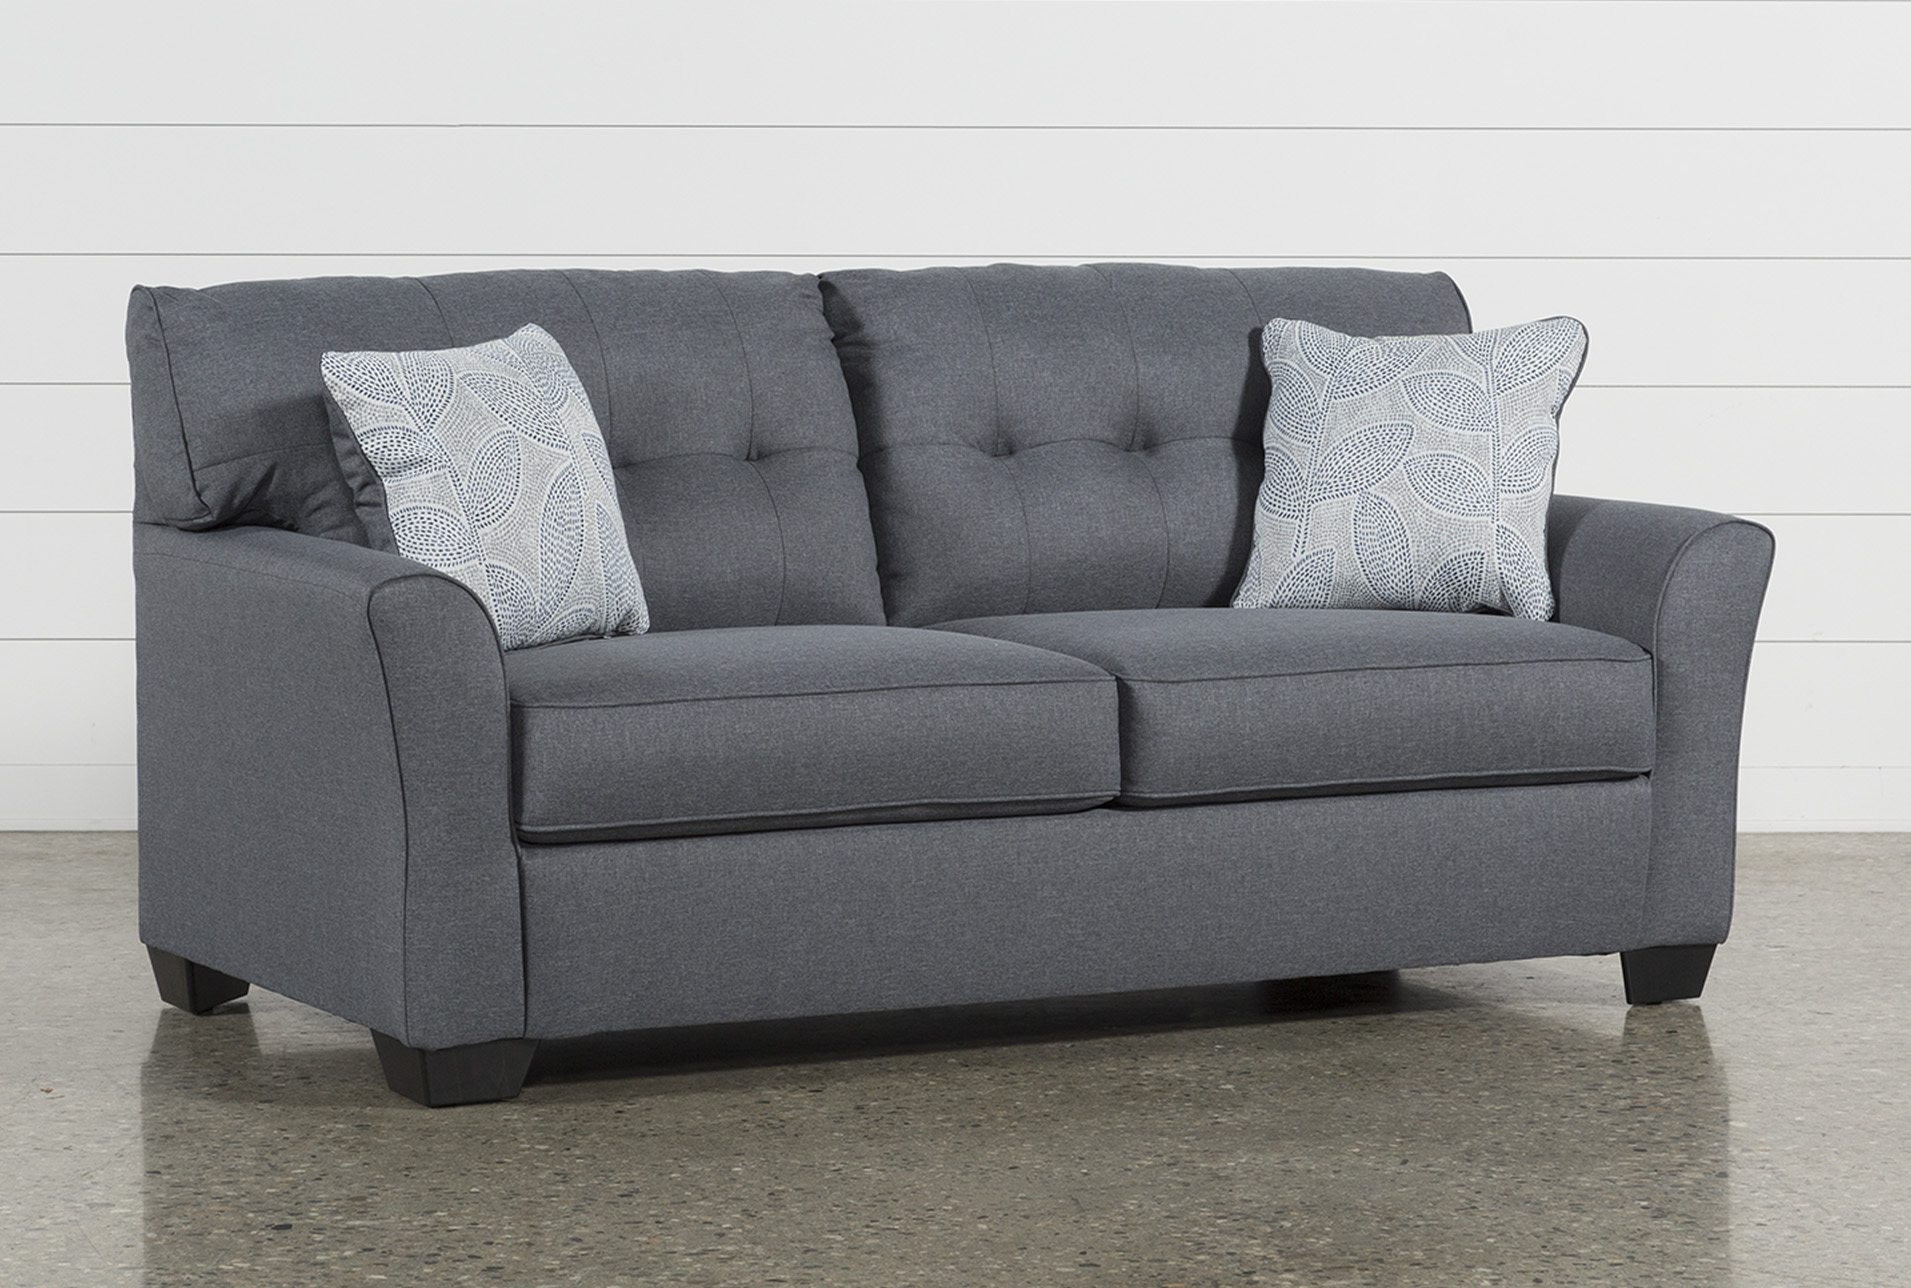 Sofa Beds + Sleeper Sofas - Free Assembly with Delivery | Living Spaces